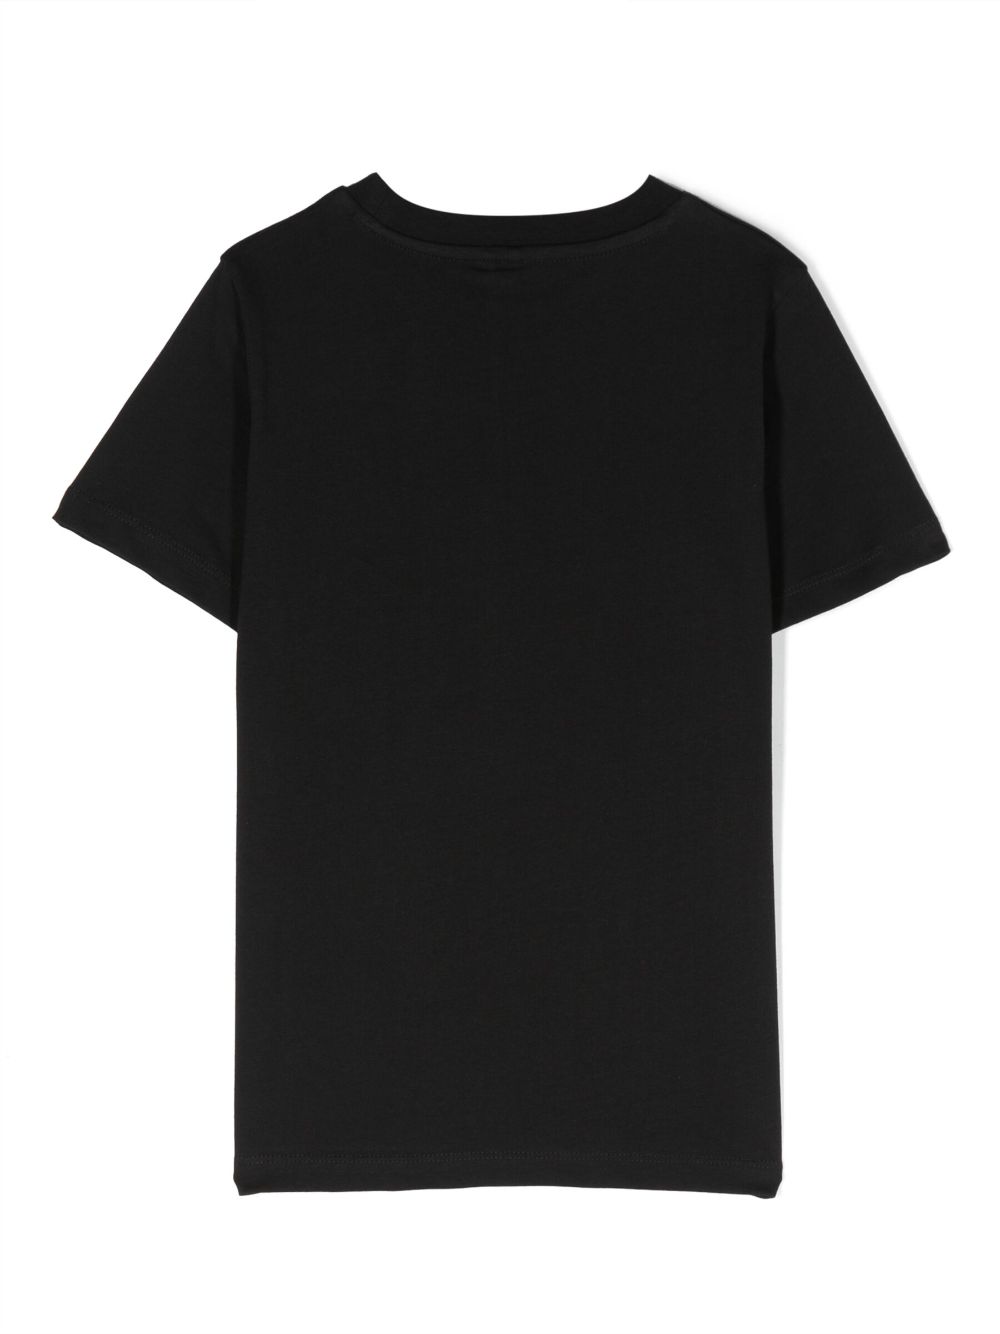 Black t-shirt for girls with print